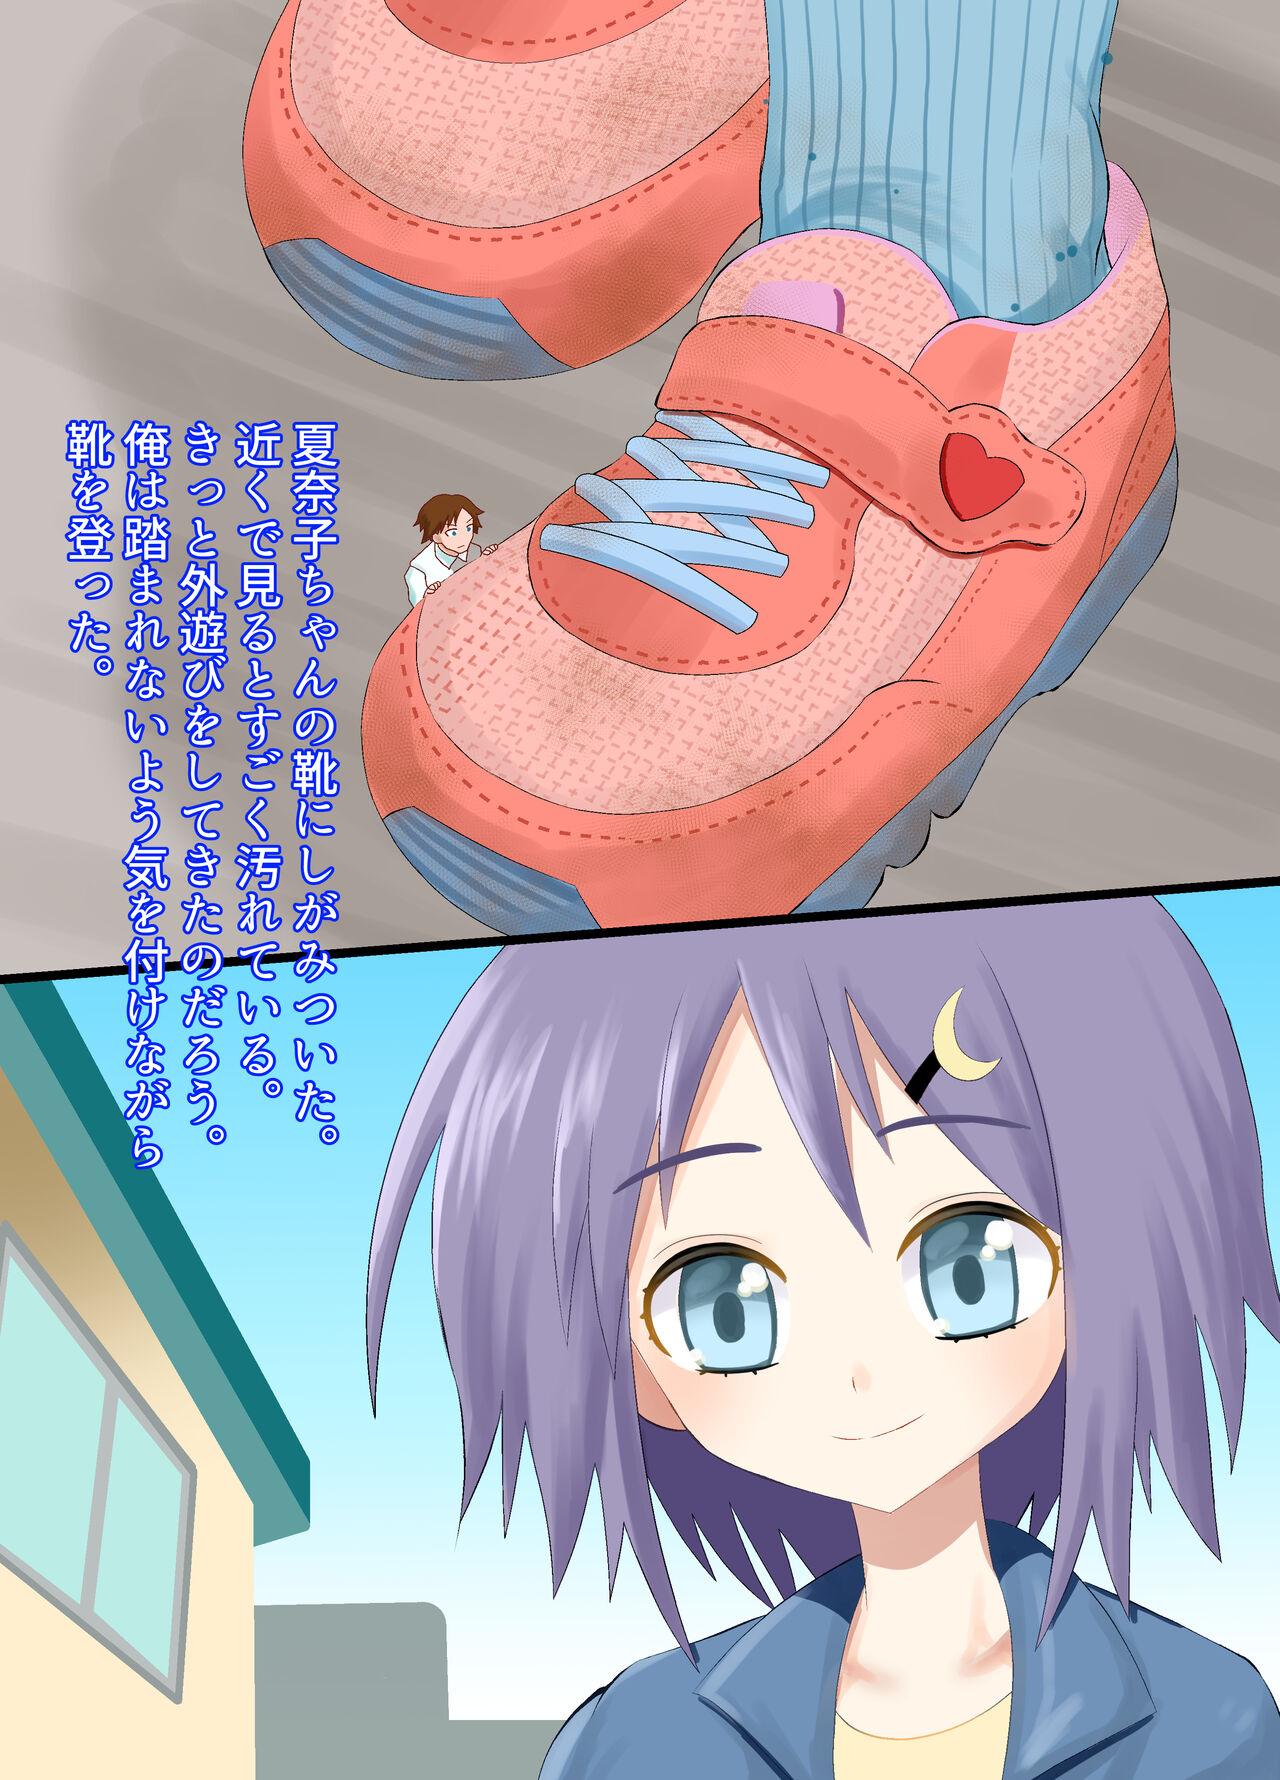 Facebook A CG collection of getting smaller and being stepped on by a girl - Original Cavalgando - Page 5